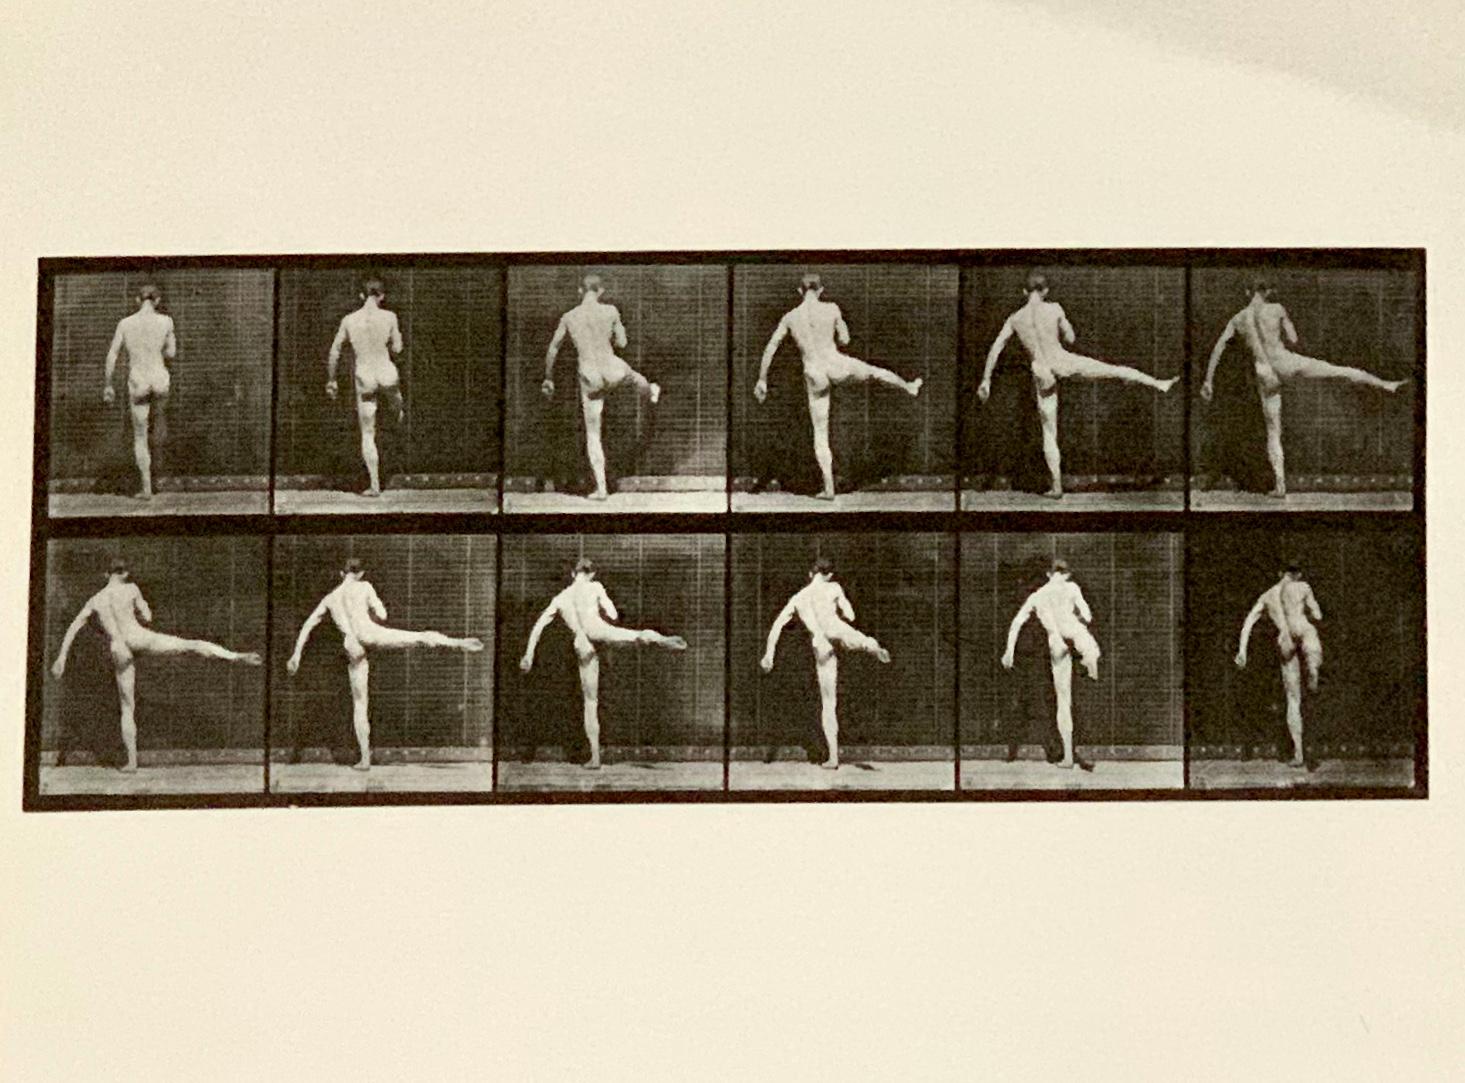 Eadward Muybridge is one of the most fascinating figures in the history of photography. Born in England, he moved to the US at the age of 20, becoming a successful bookseller in San Francisco in the decade that followed. En route to Europe for a